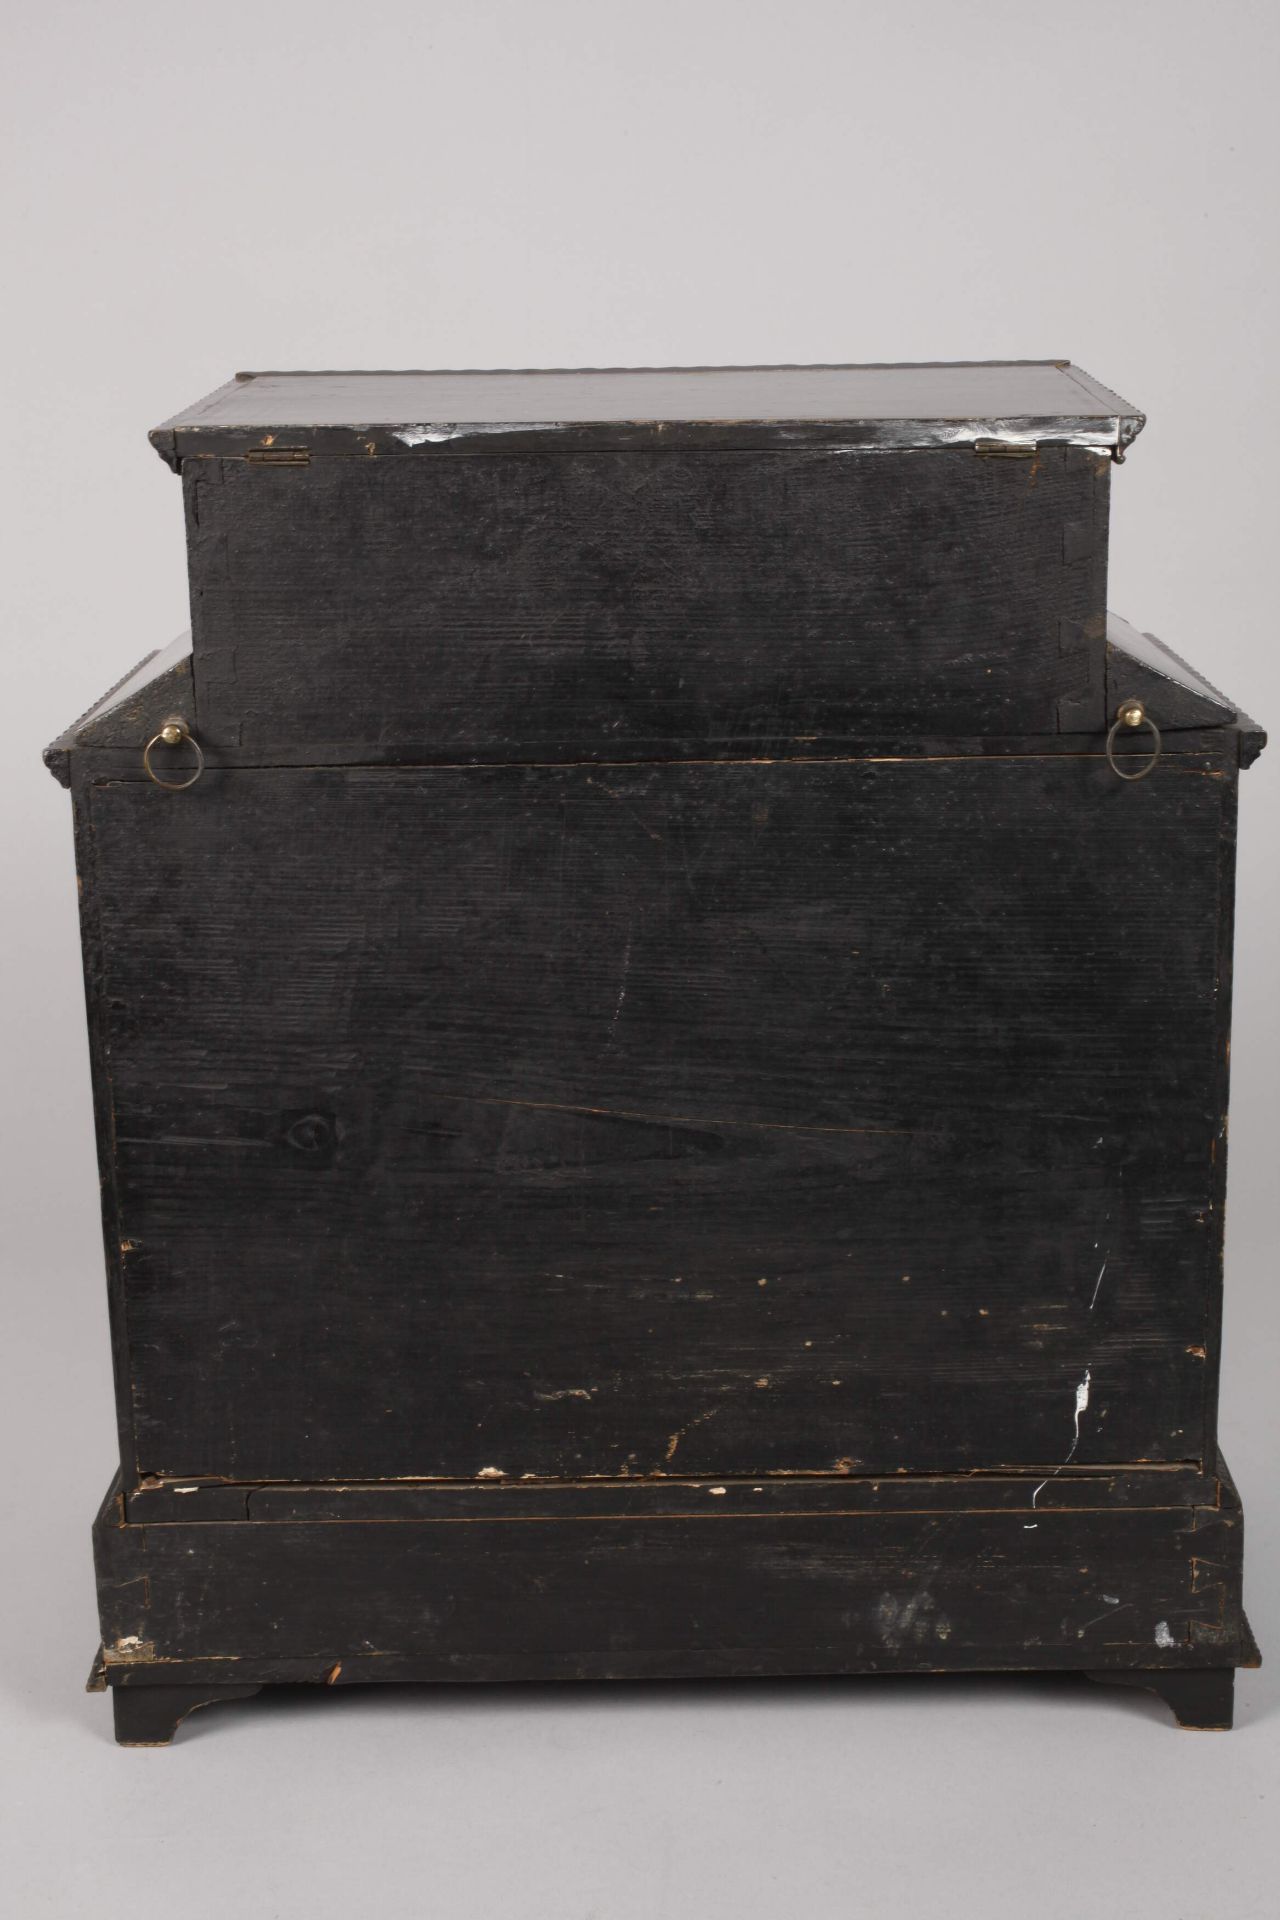 Small lacquer cabinet - Image 7 of 8